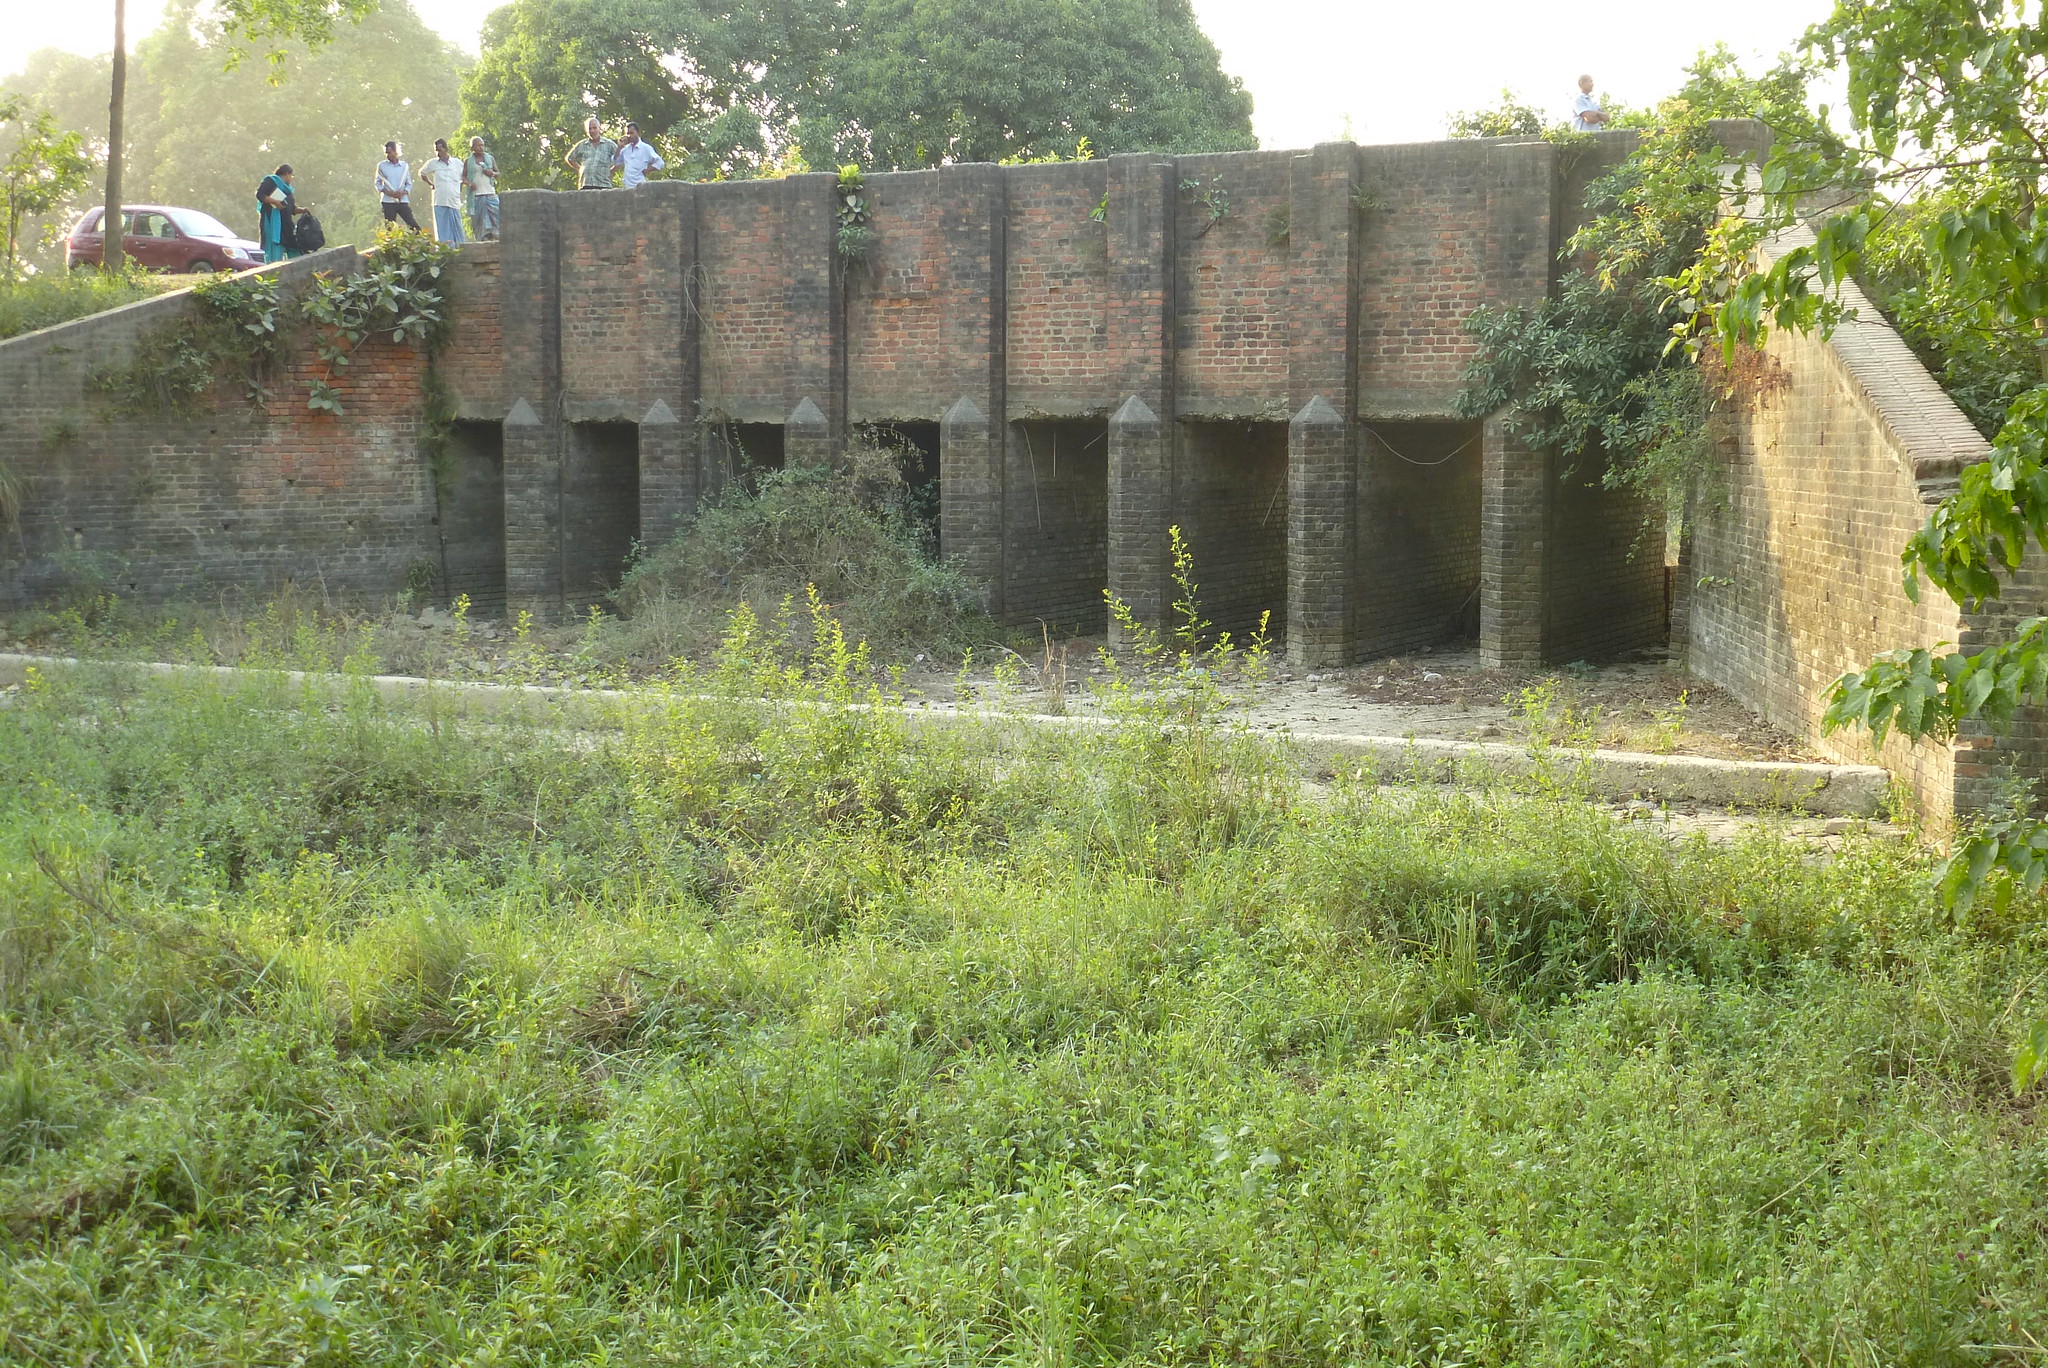 Along with the construction of the new instream water storage structures, repairs to the existing structures such as this one on the Jhanjharpur-Manigachhi road need to be made.